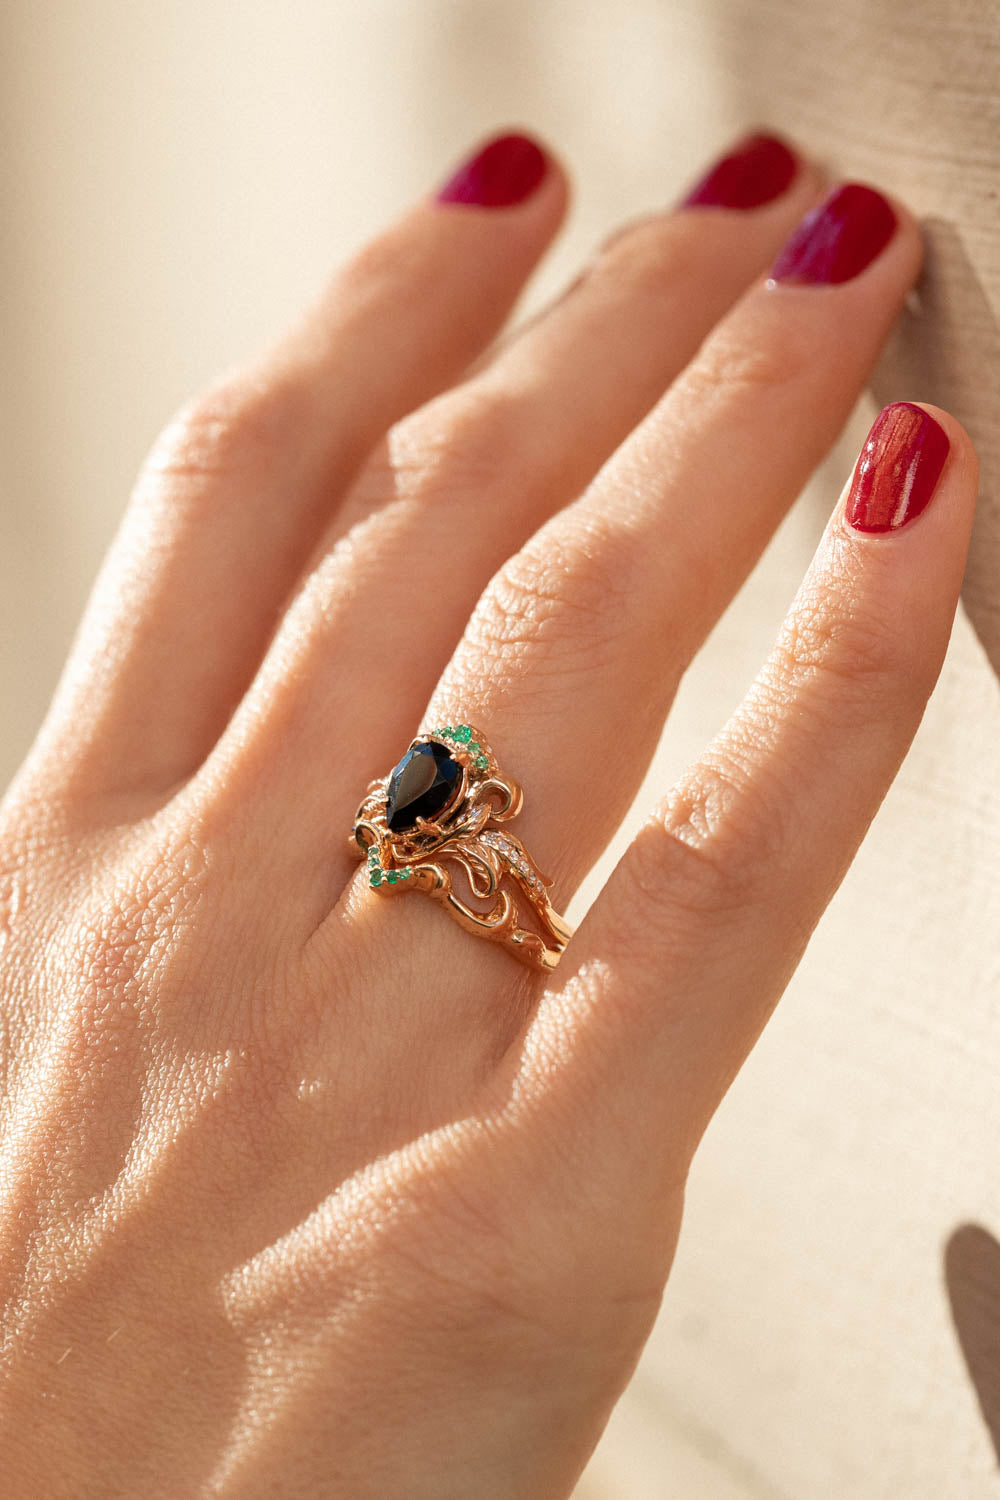 Fantasy engagement ring with black spinel, emeralds and diamonds /  Faunus - Eden Garden Jewelry™